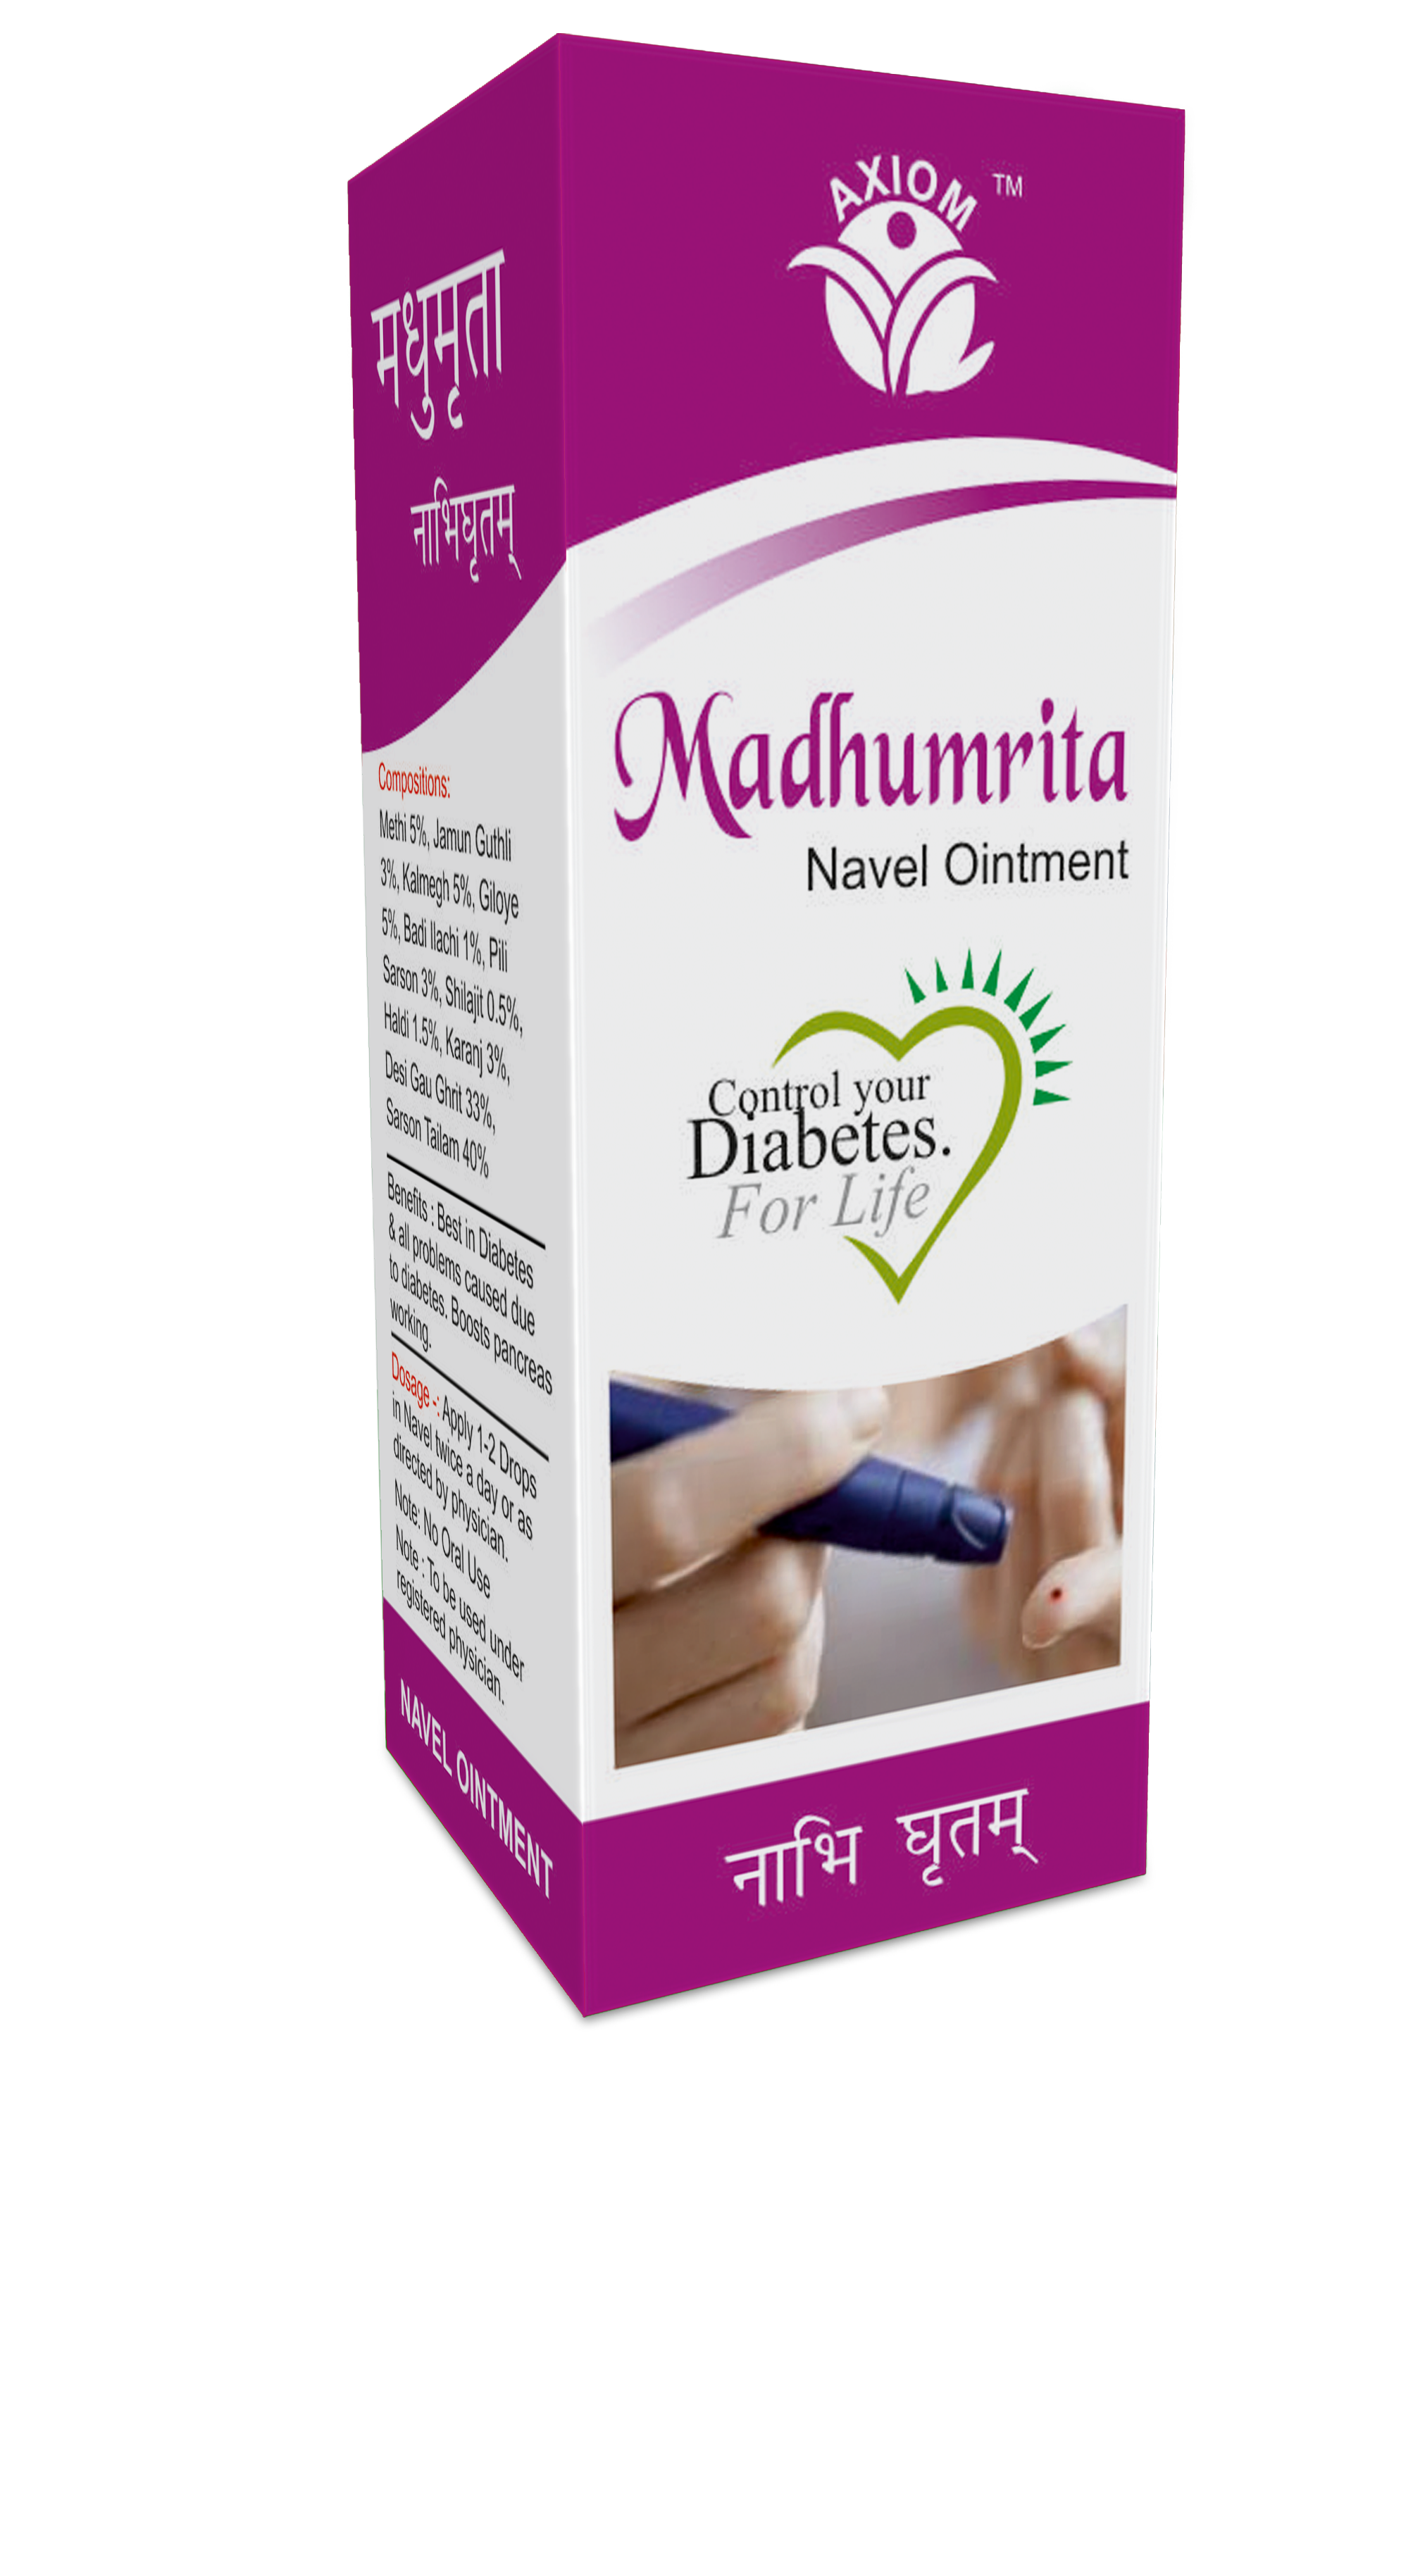 Buy Axiom Madhumrita Navel Ointment at Best Price Online